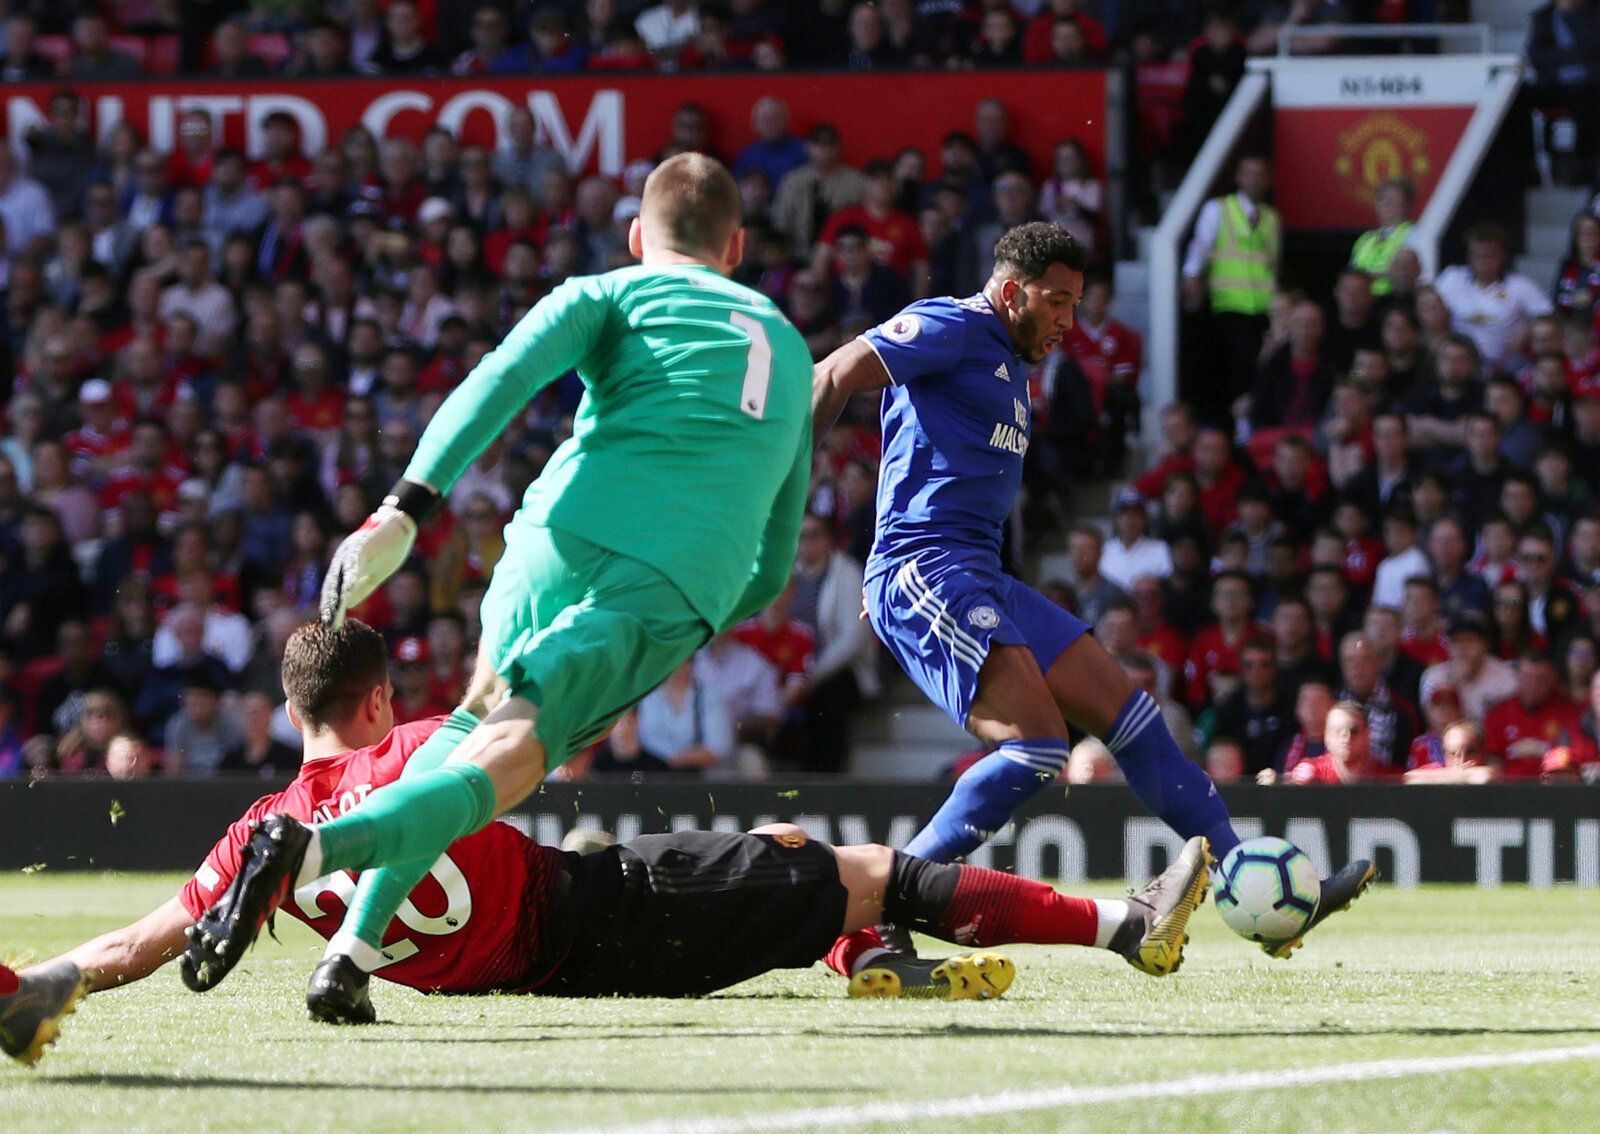 Soccer Football - Premier League - Manchester United v Cardiff City - Old Trafford, Manchester, Britain - May 12, 2019  Cardiff City's Nathaniel Mendez-Laing scores their second goal      Action Images via Reuters/Lee Smith  EDITORIAL USE ONLY. No use with unauthorized audio, video, data, fixture lists, club/league logos or 